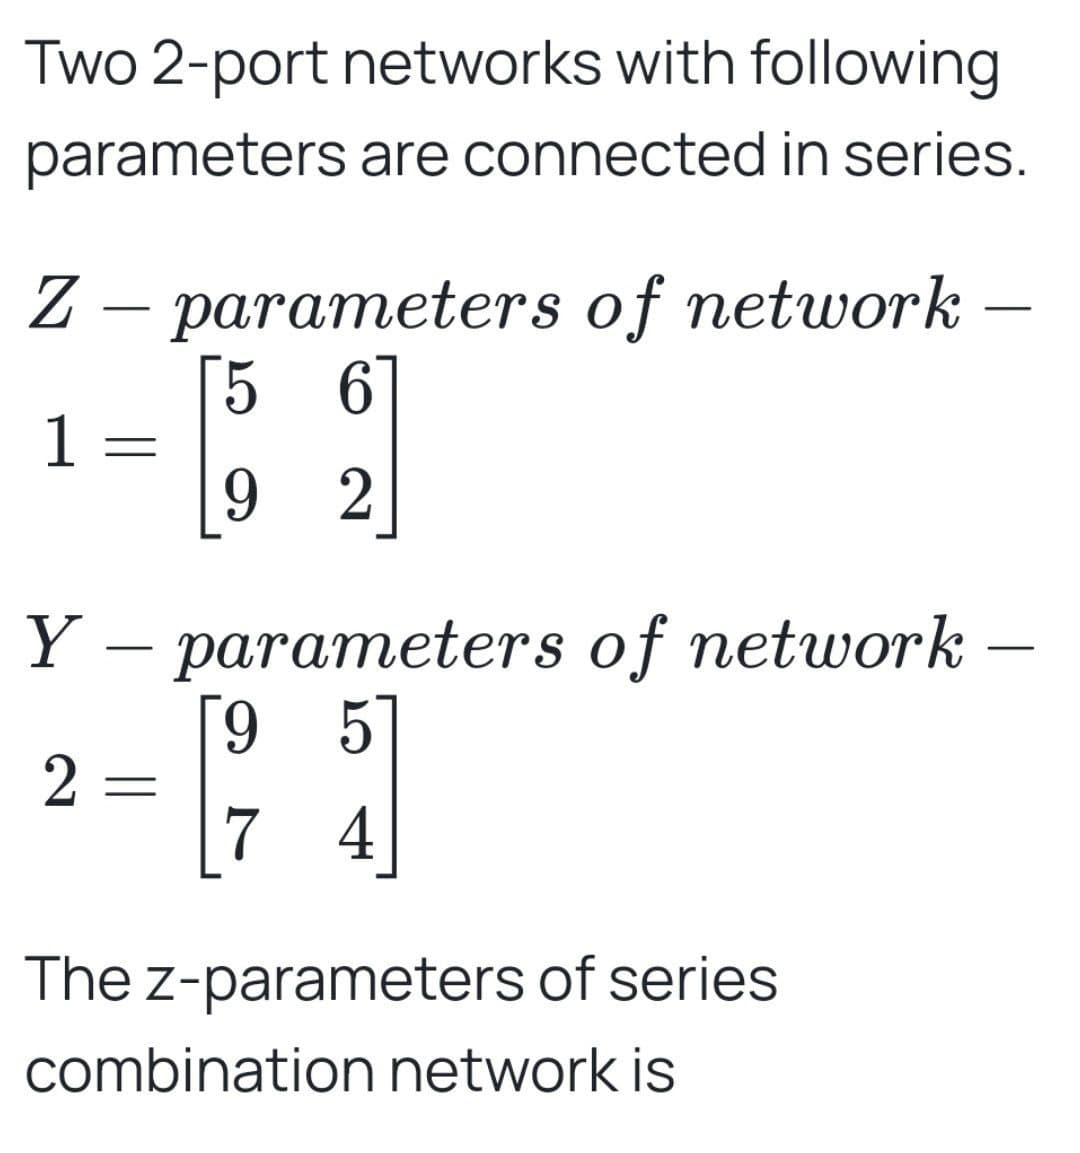 Two 2-port networks with following
parameters are connected in series.
Z parameters of network
-
5 6
-
1
92
Y - parameters of network –
2
[95]
7 4
The z-parameters of series
combination network is